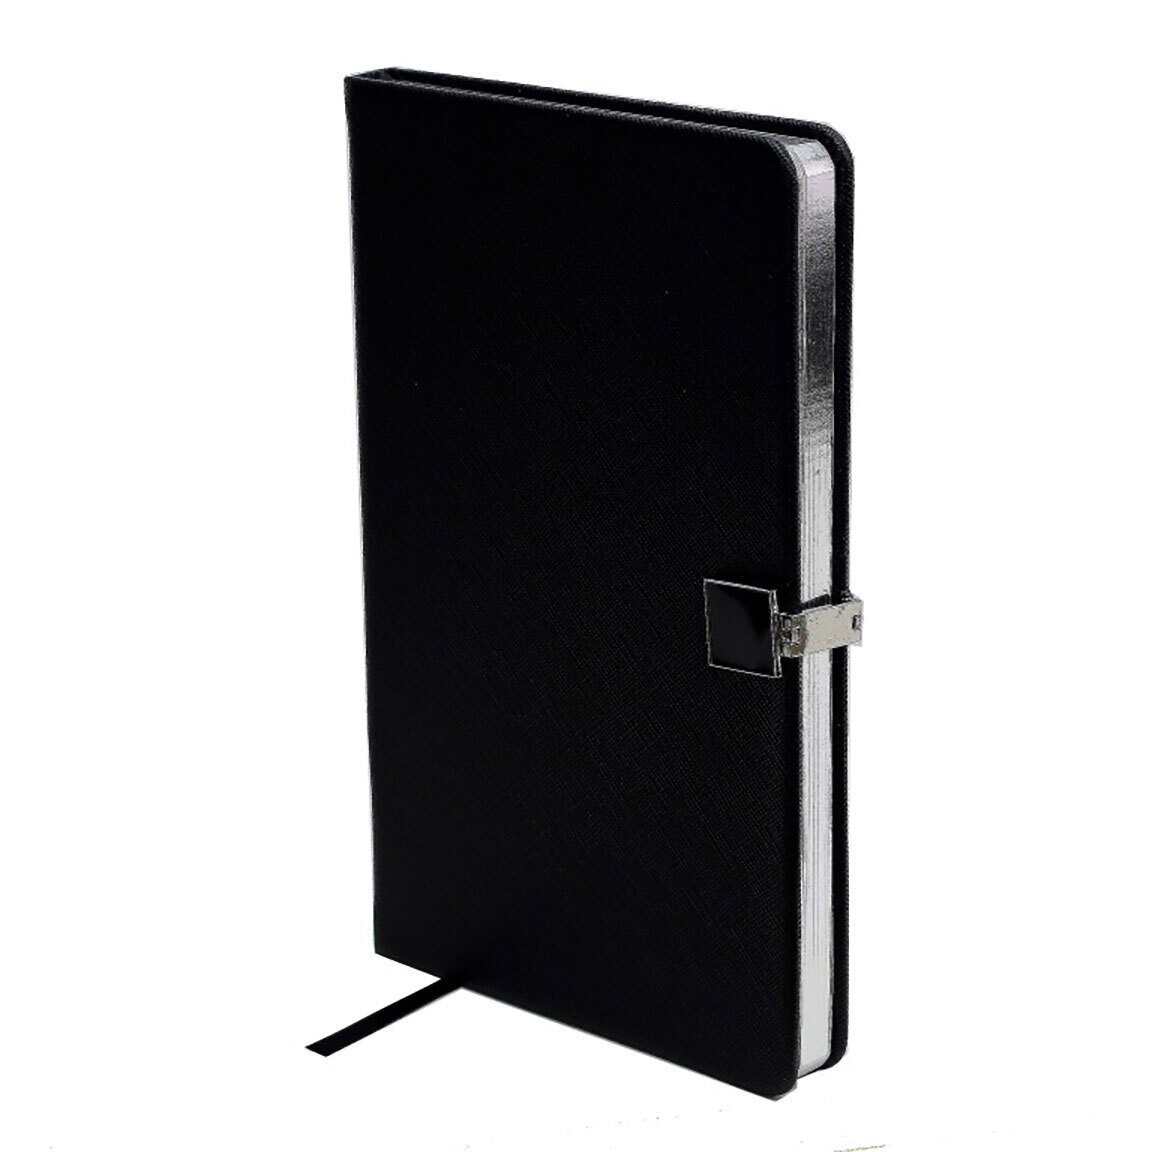 Addison Ross Notebook A5 Black & Silver Pu Leather NB1050